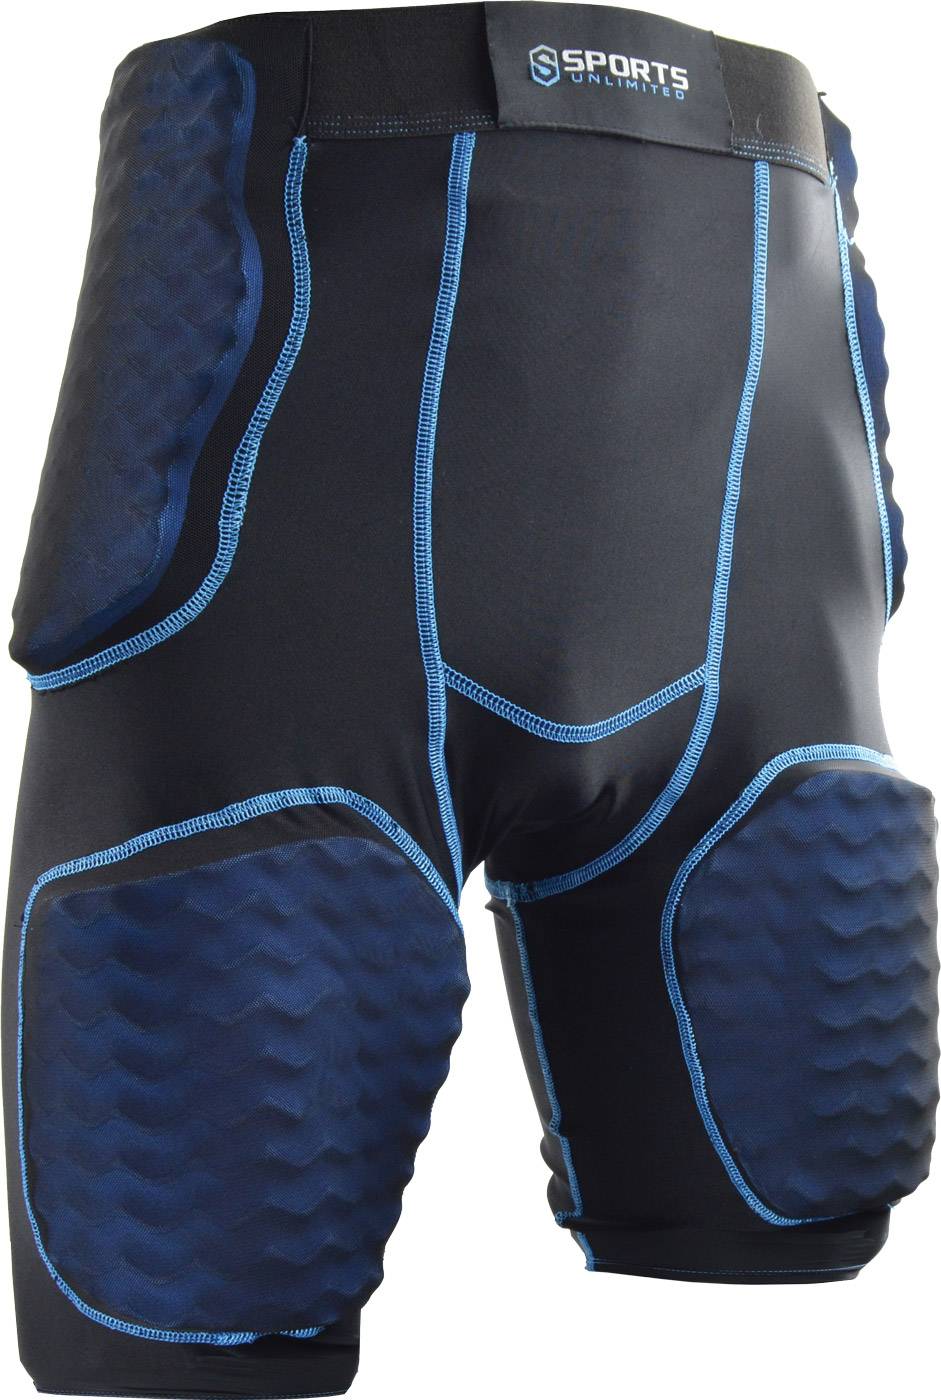 Adult Padded Compression Shorts w/ Integrated Padding Exxact Sports Elite 5-Pad Football Girdle 